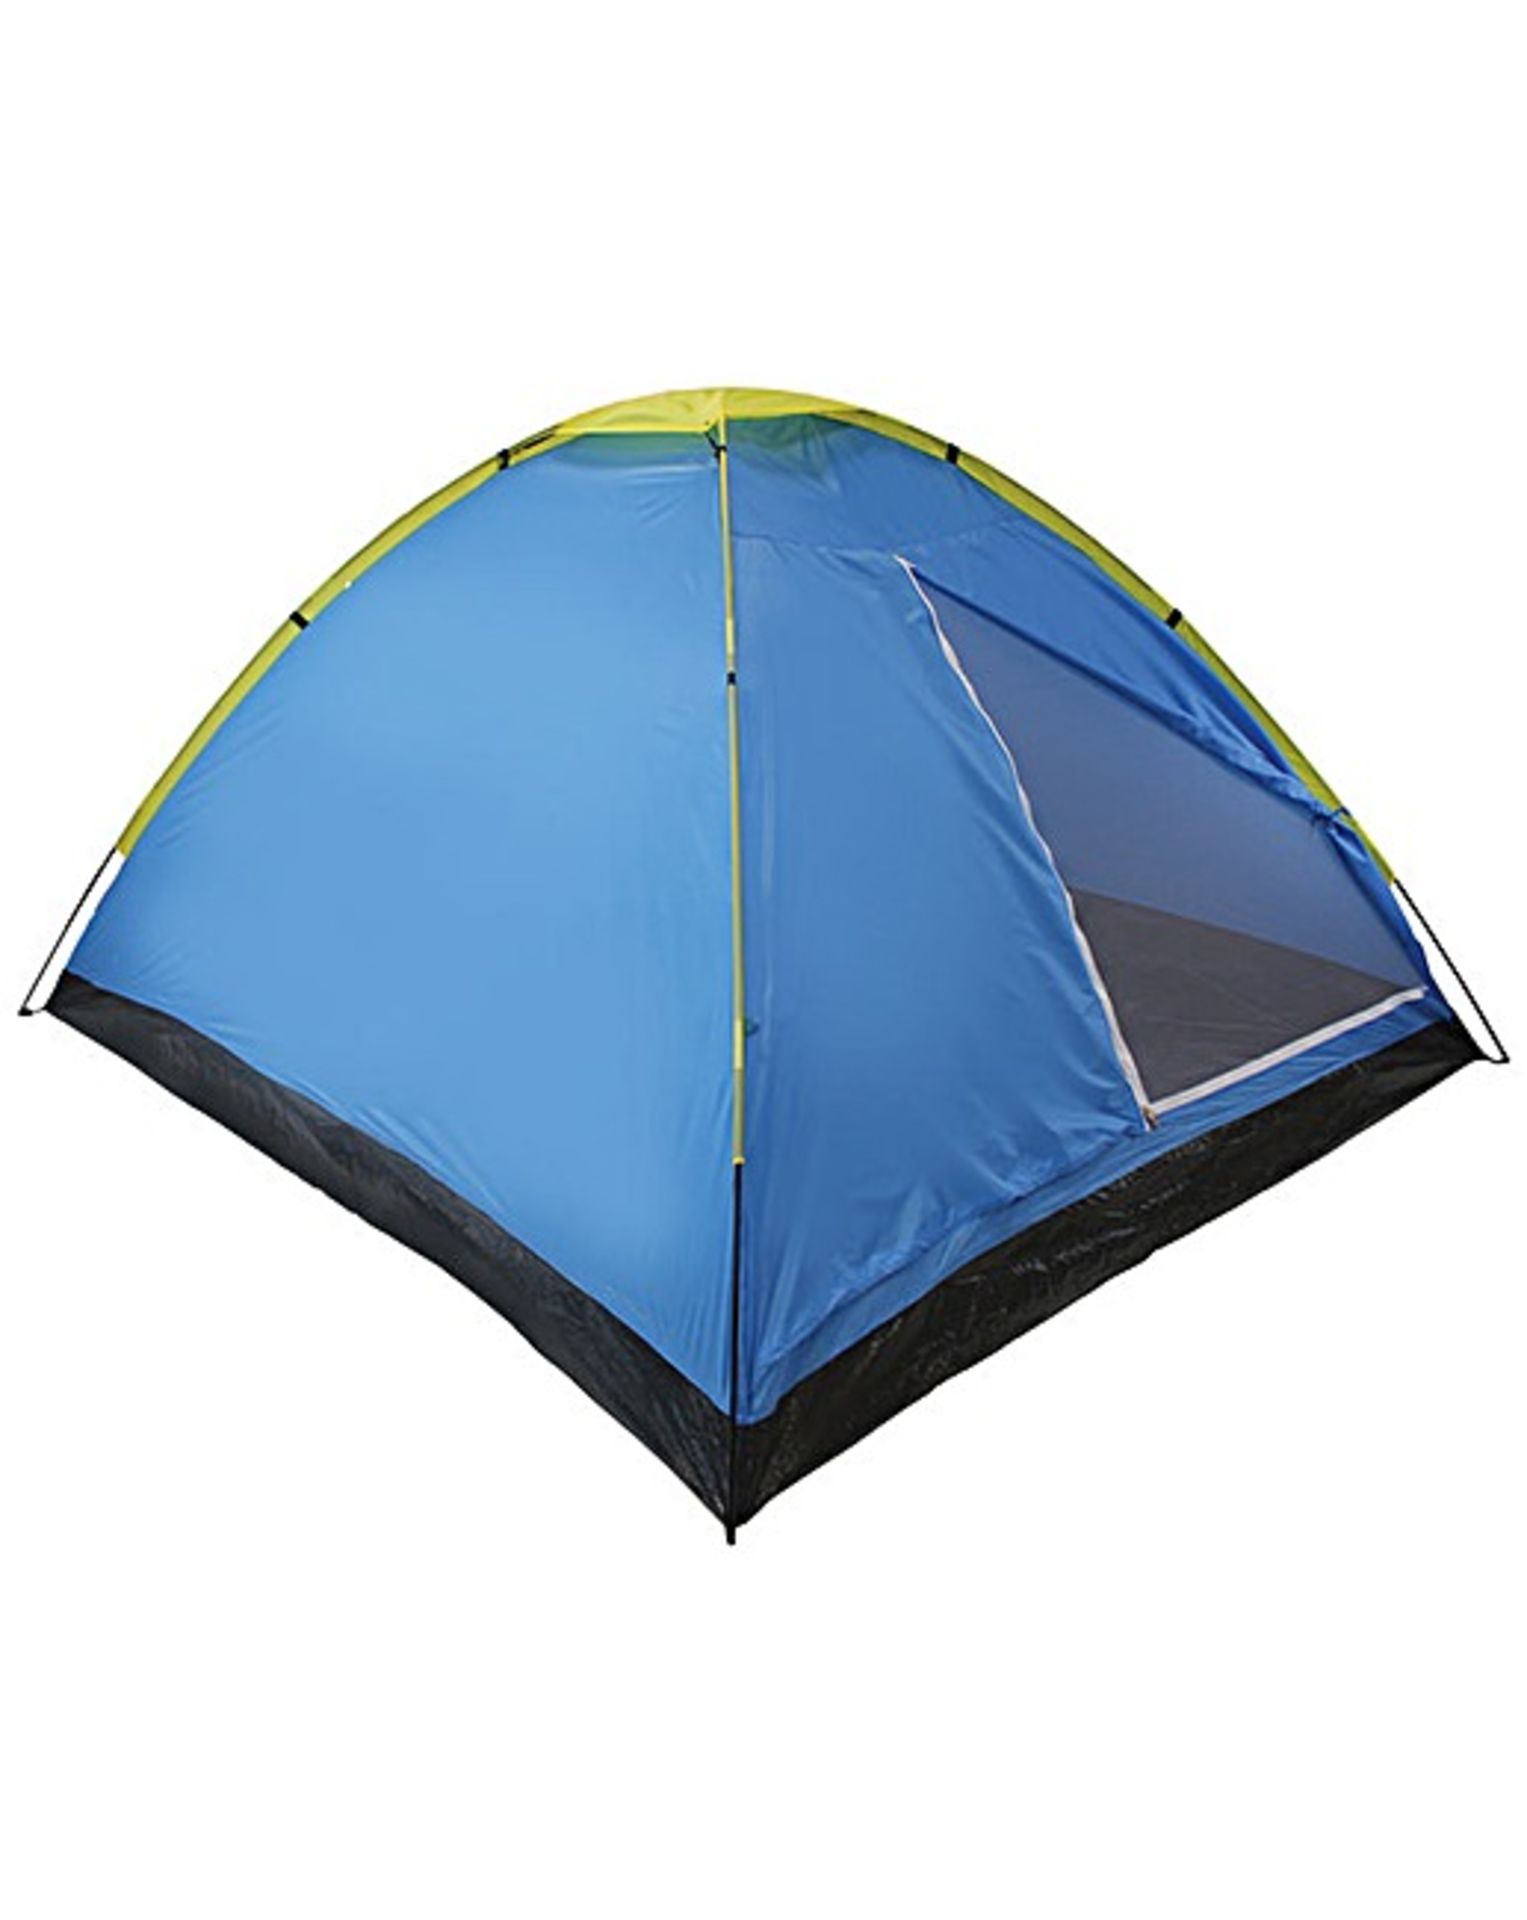 V Brand New Two Person Dome Tent With Fibreglass Poles And Taped Seams RRP21.00 (JD Williams)